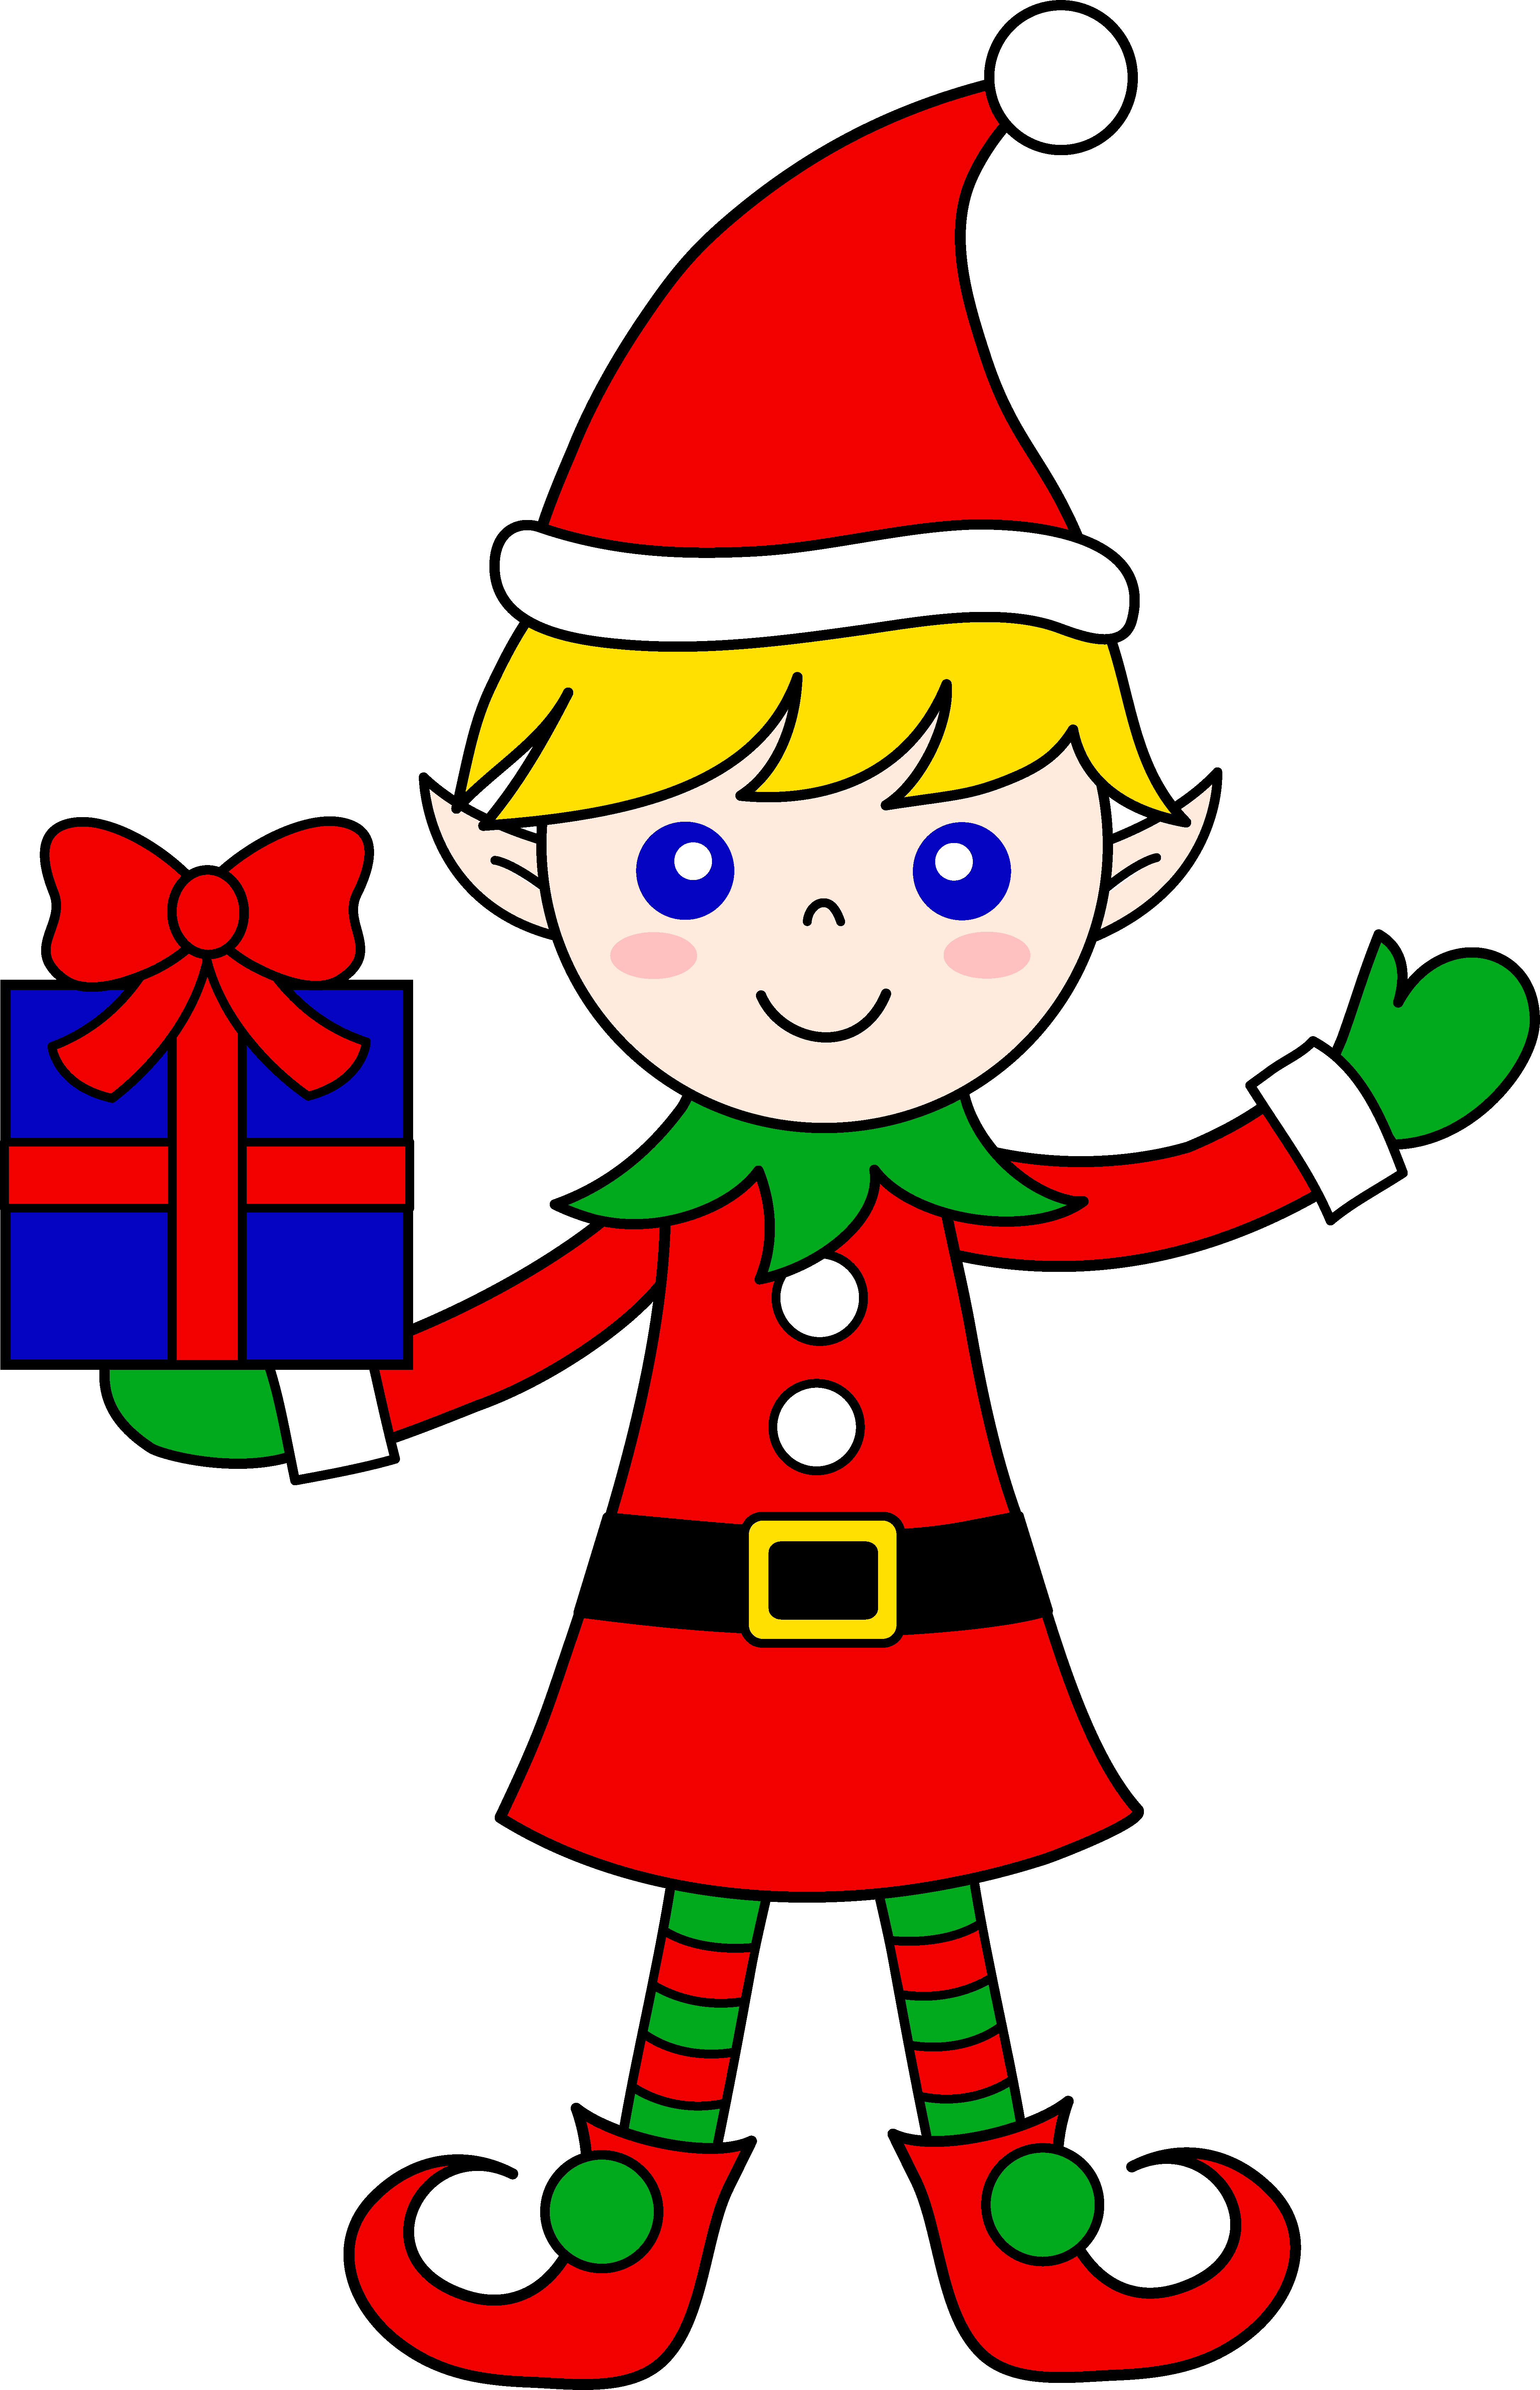 Cute Christmas Elf With Gift - Free Clip Art